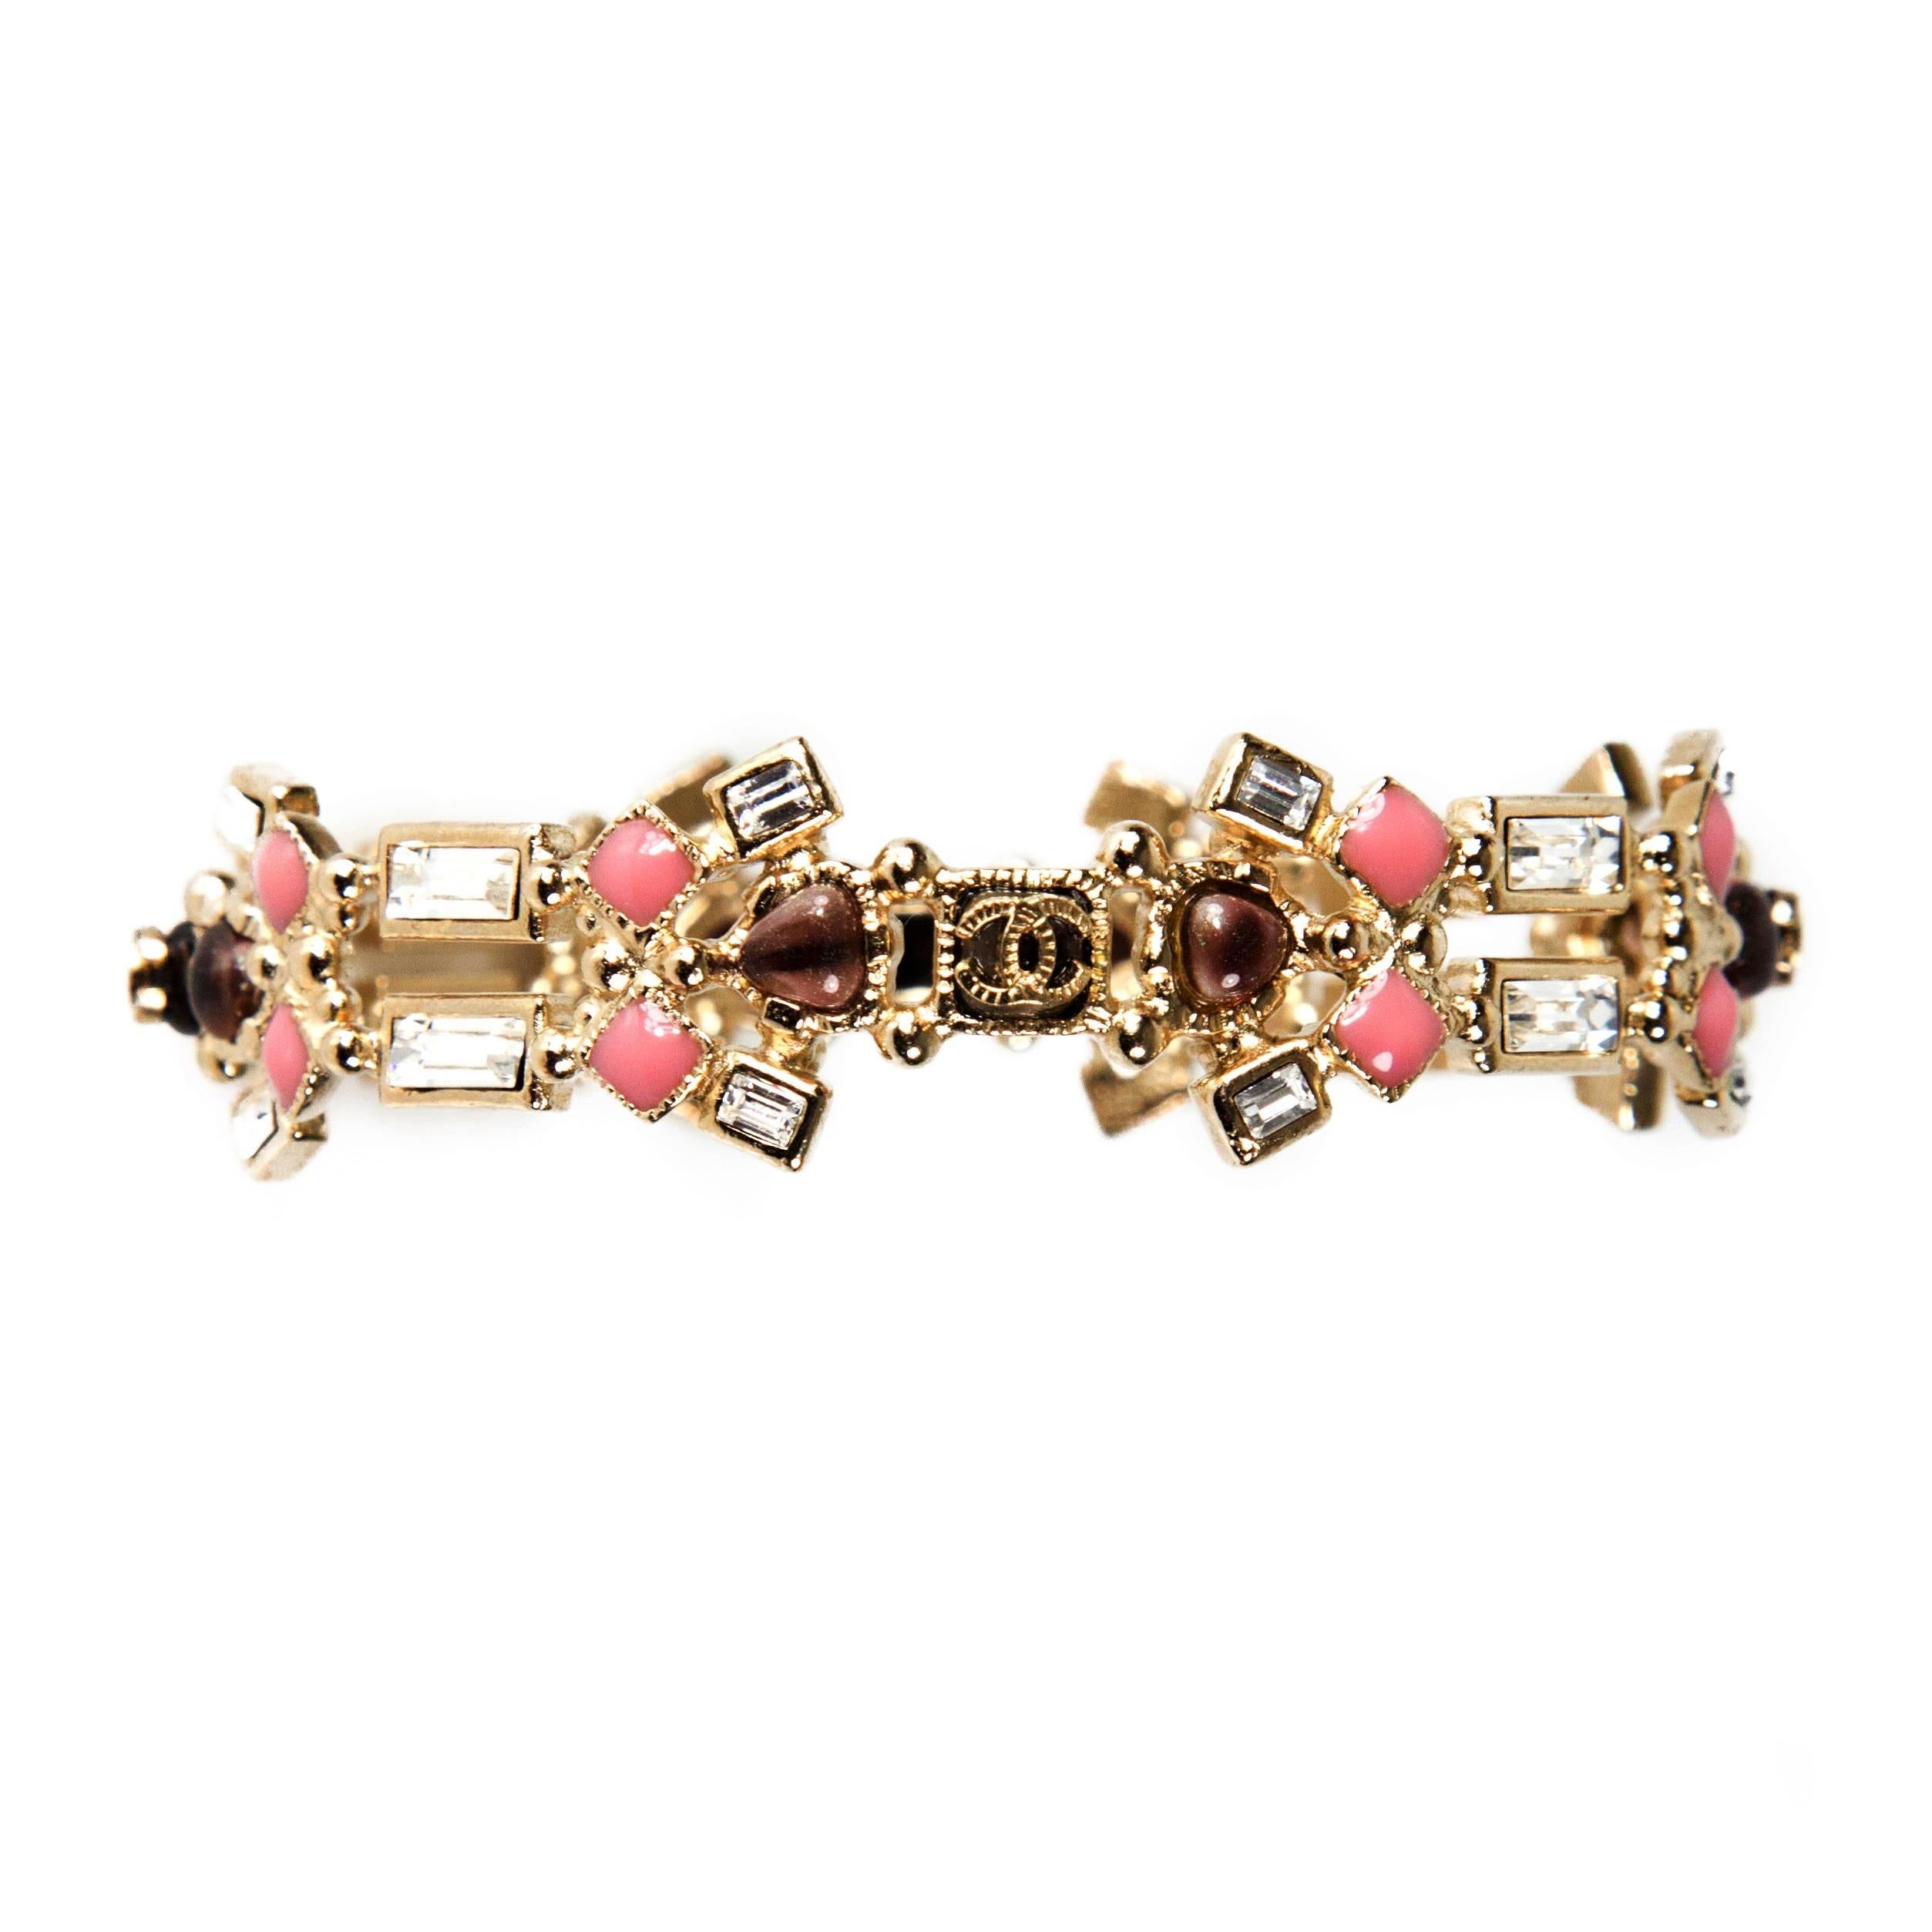 Chanel - Crystal Gem Gripoix Bracelet

Color: Gold / Pink / Brown

Material: Metal / Crystal

------------------------------------------------------------
 
Details:

- cut outs throughout

- gold tone hardware

- CC logo at brown